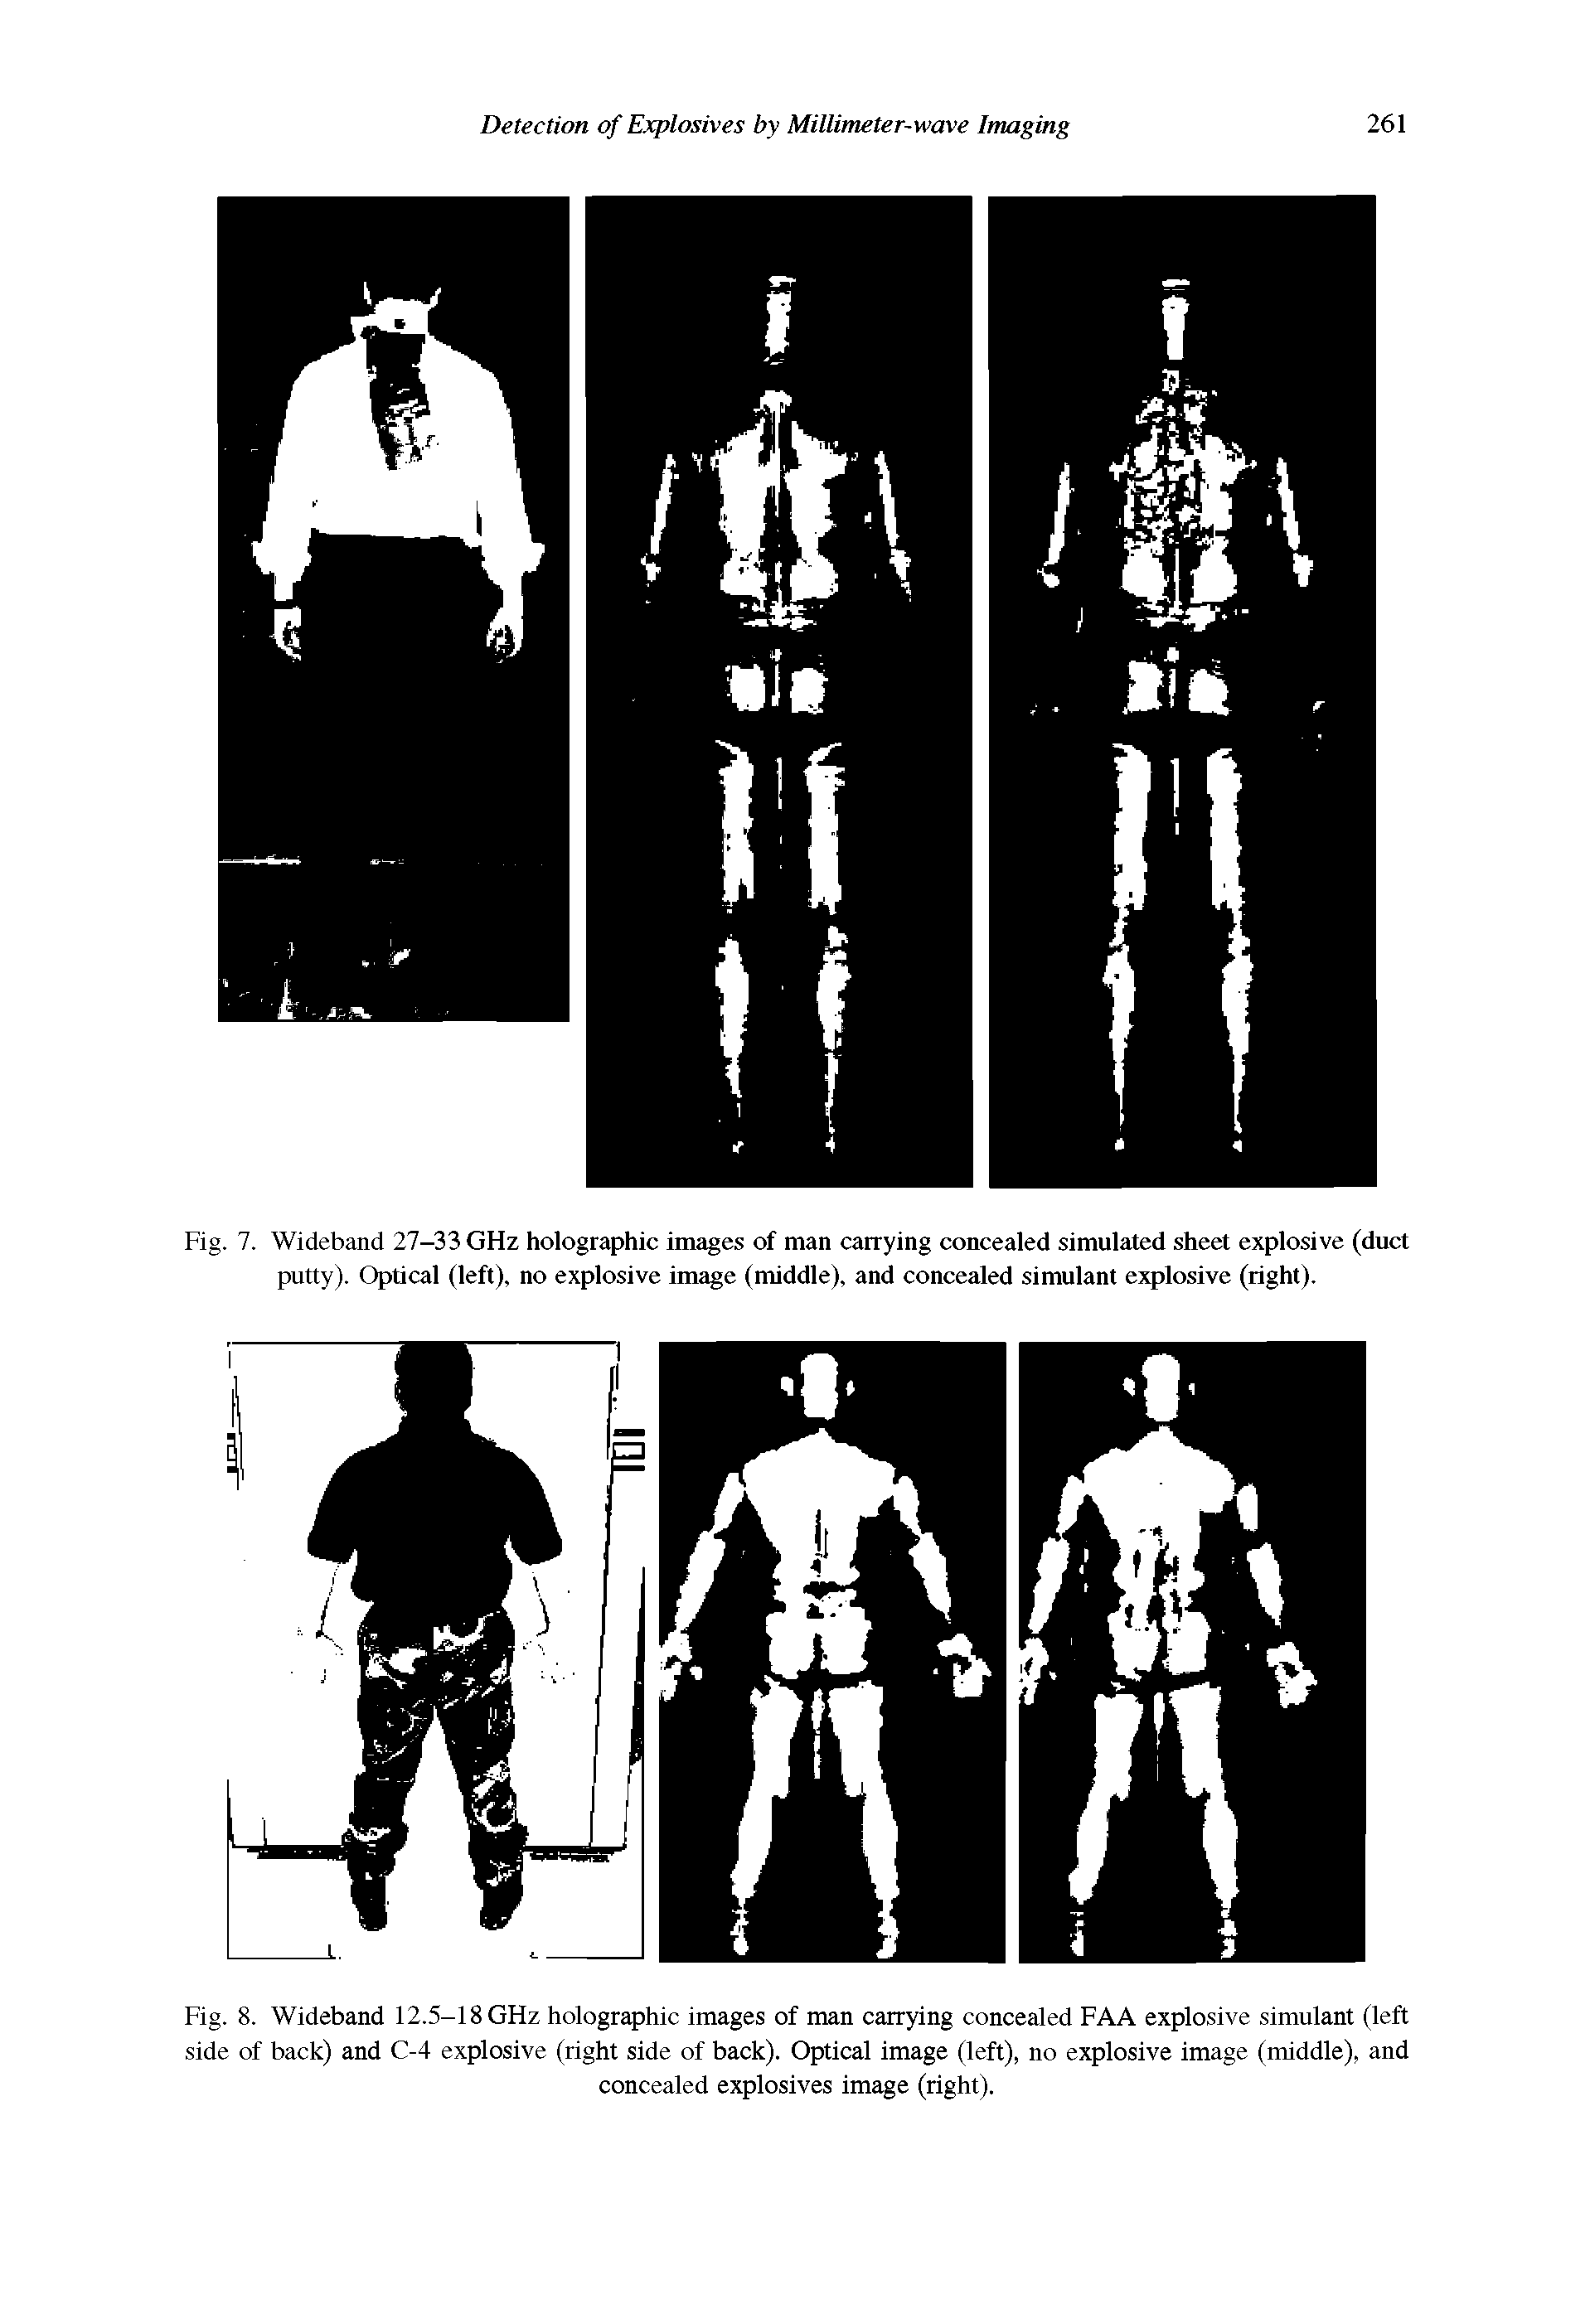 Fig. 7. Wideband 27-33 GHz holographic images of man carrying concealed simulated sheet explosive (duct putty). Optical (left), no explosive image (middle), and concealed simulant explosive (right).